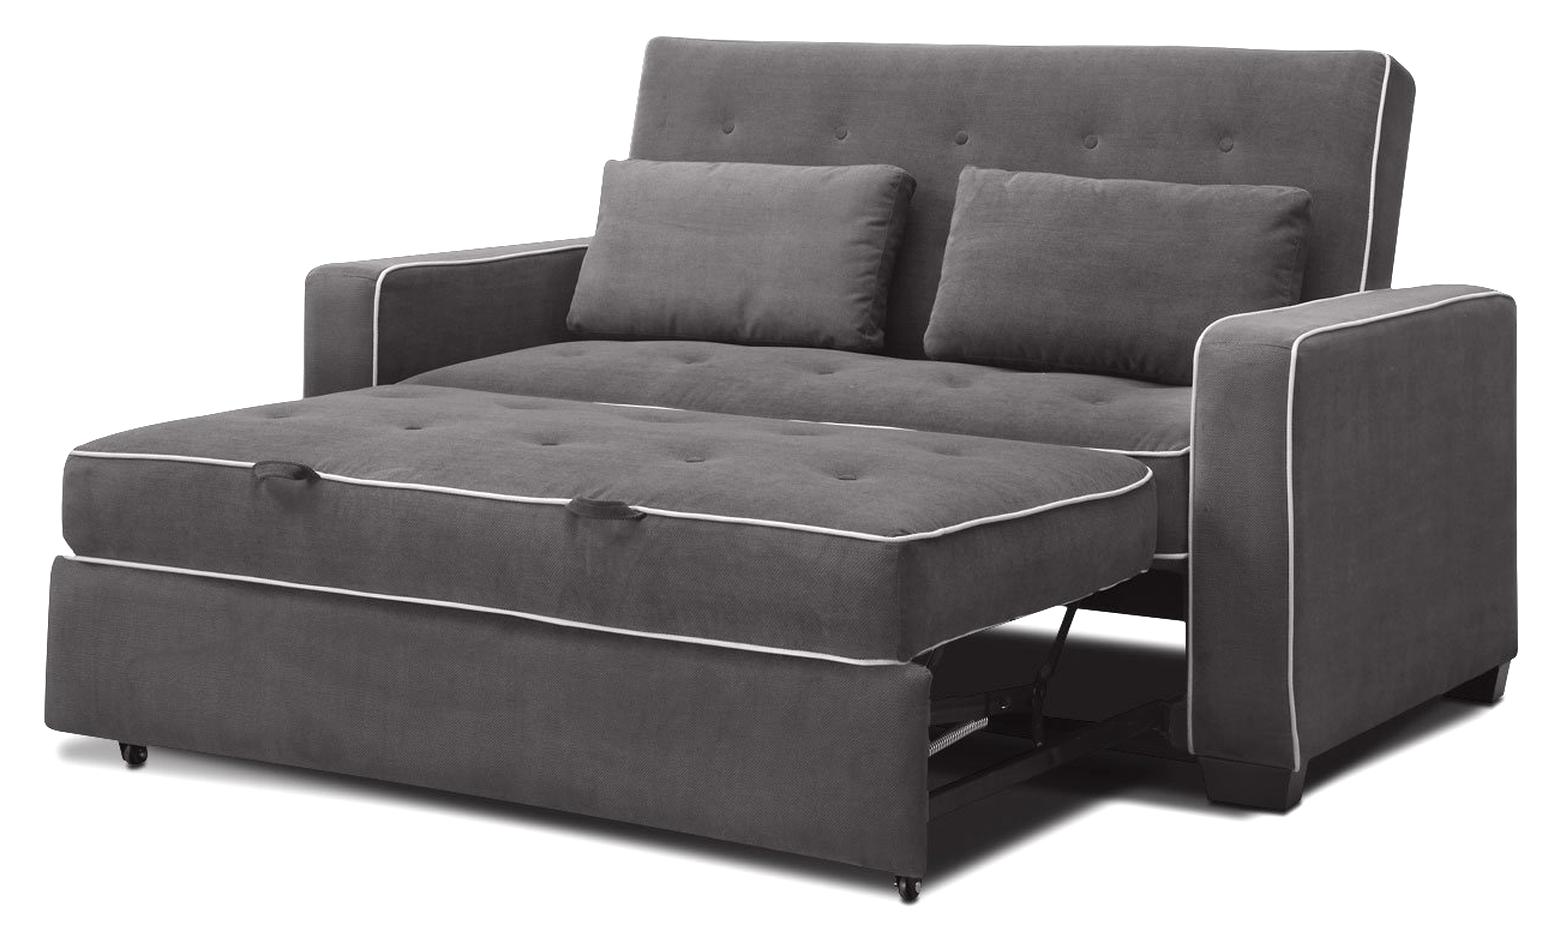 sofa bed for sale at ollies lynchburg